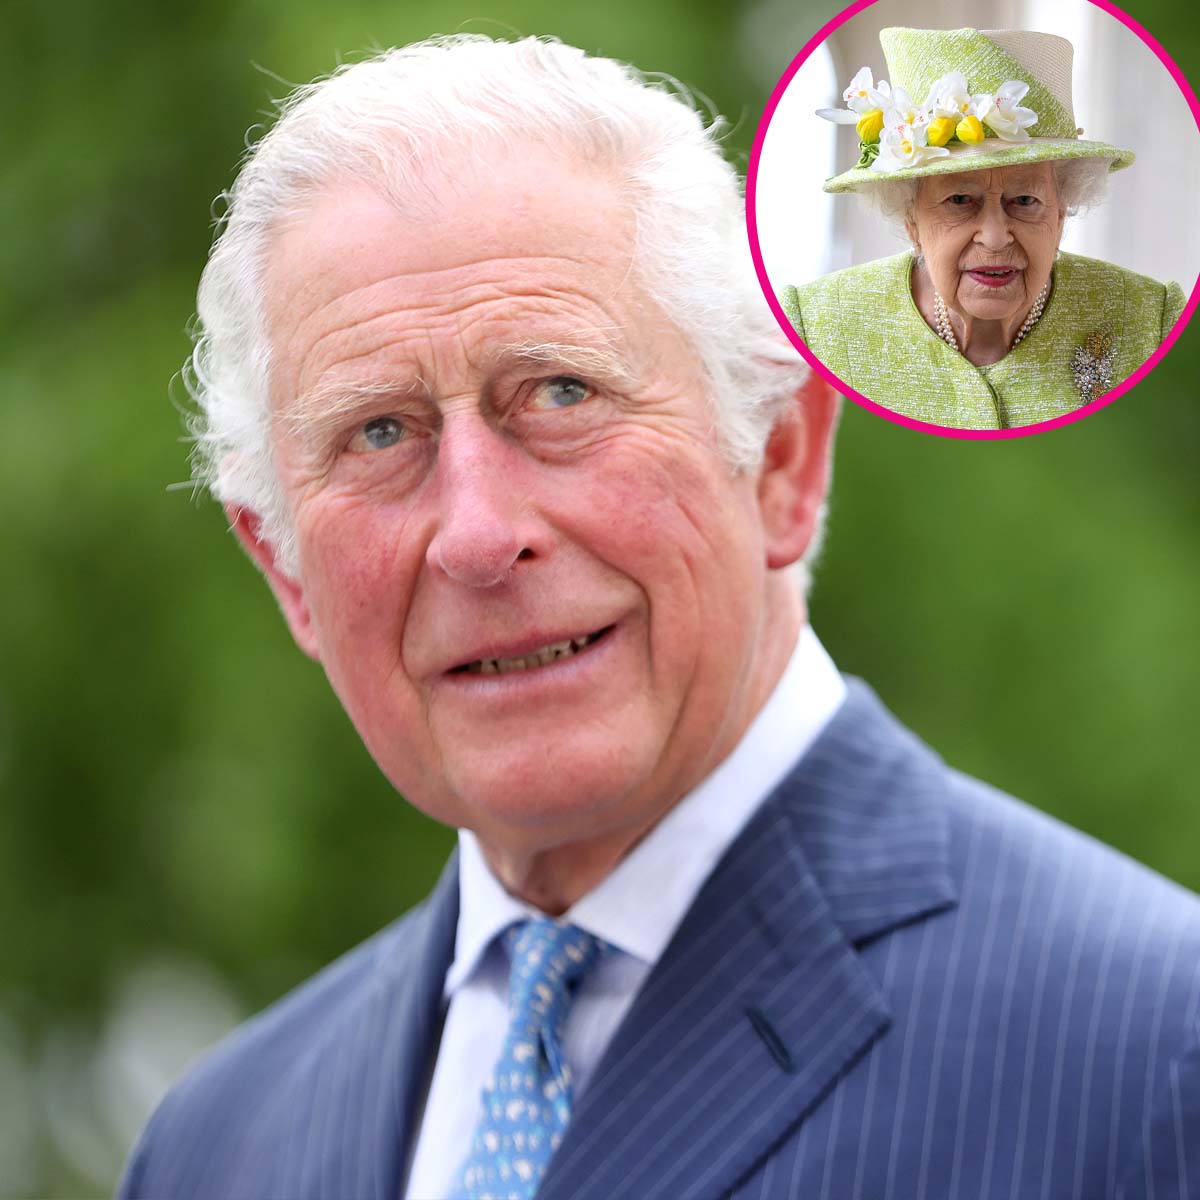 Prince Charles Is the New King After Queen Elizabeth's Death